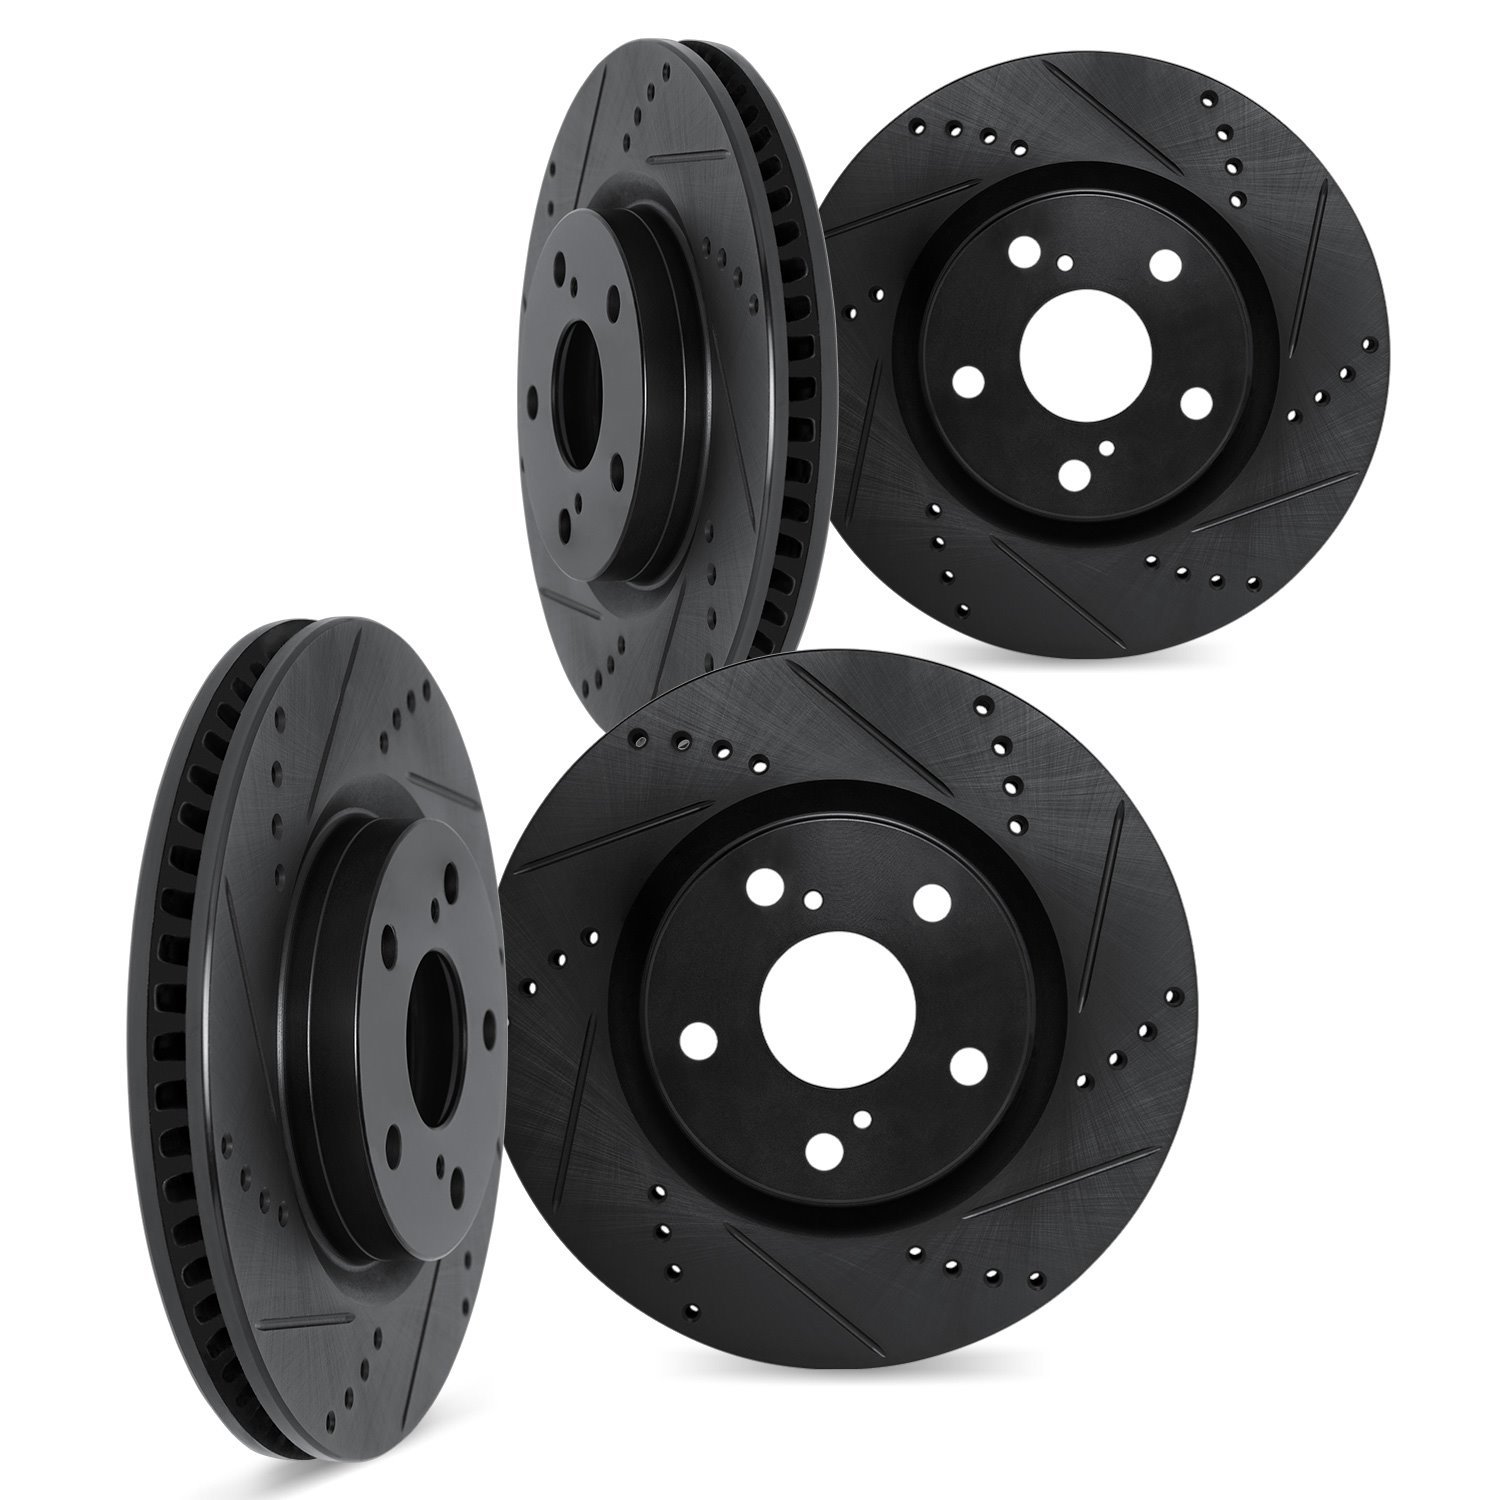 8004-02020 Drilled/Slotted Brake Rotors [Black], 1986-1986 Porsche, Position: Front and Rear